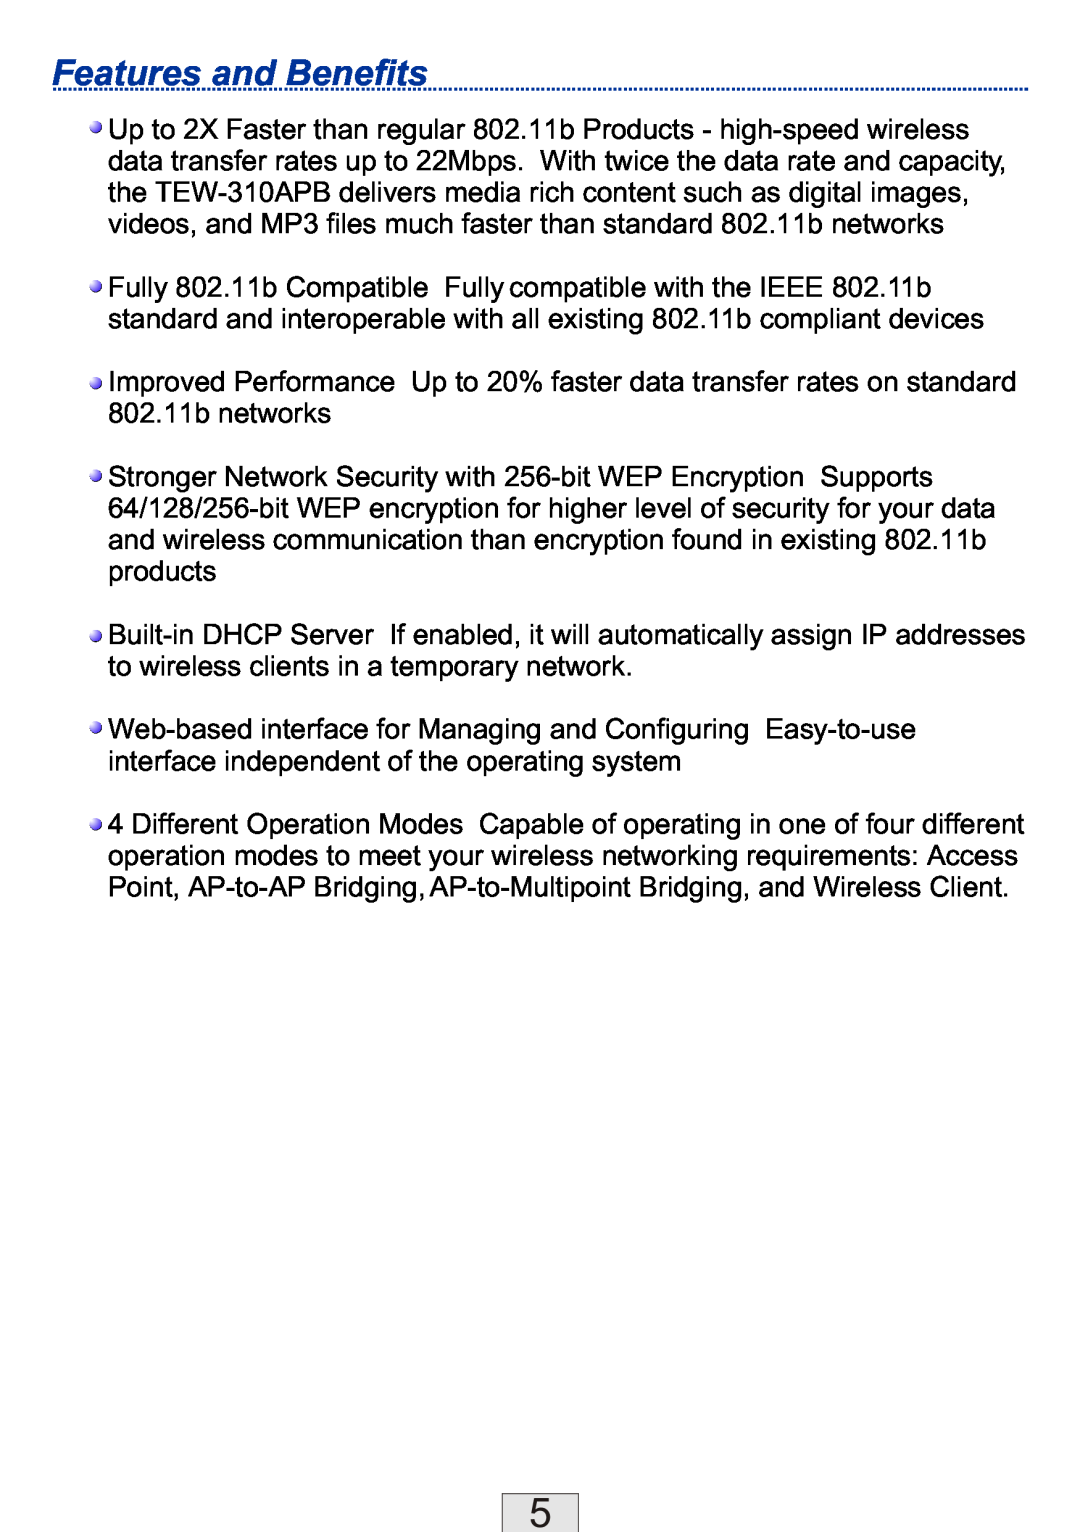 TRENDnet TEW-310APBX manual Features and Benefits 